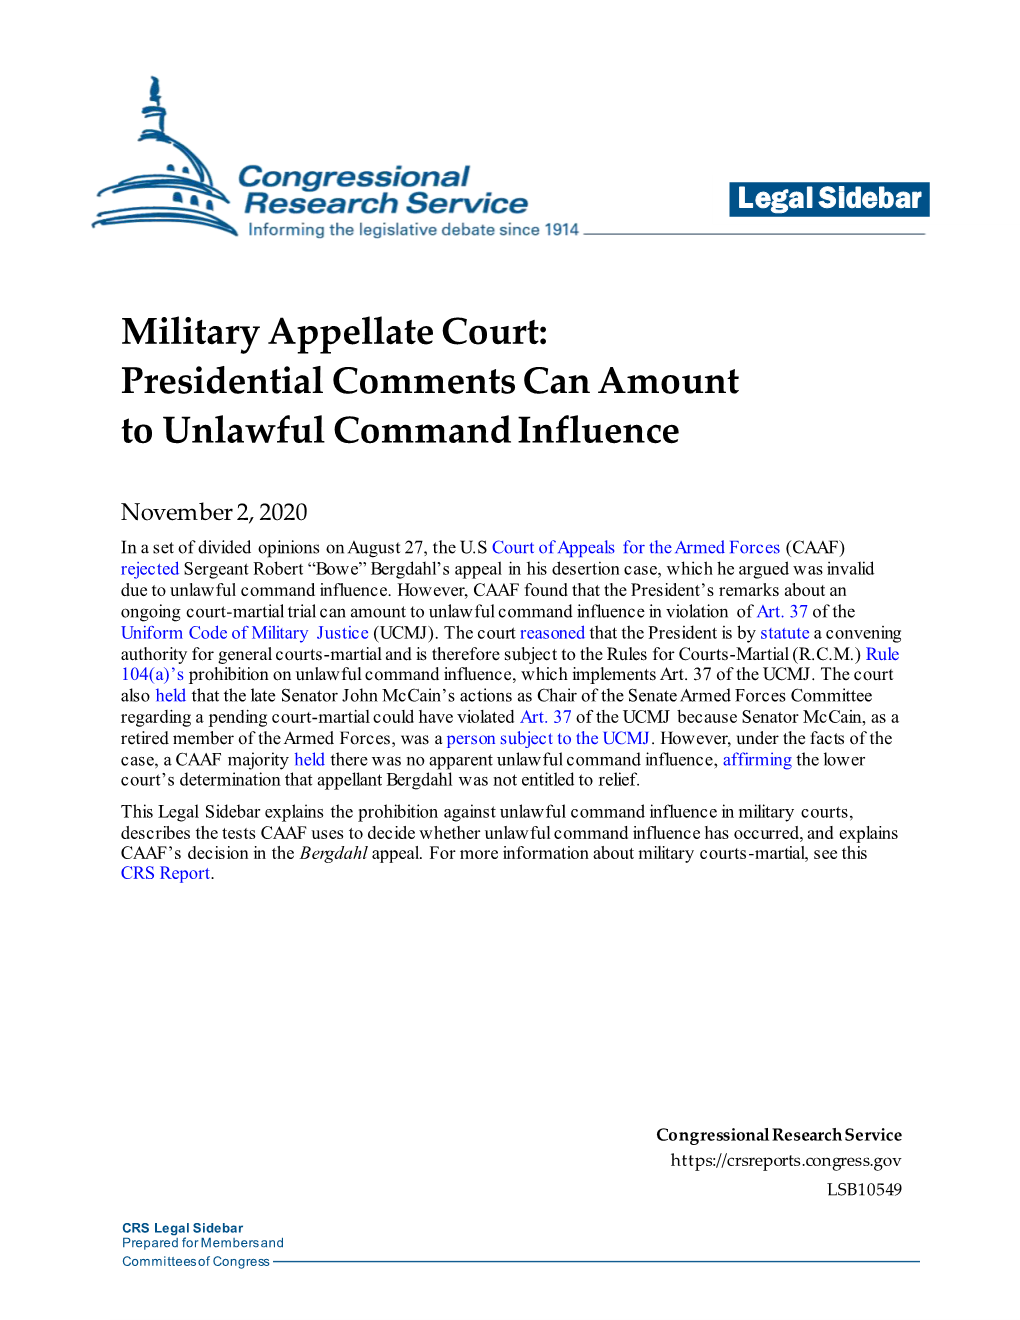 Military Appellate Court: Presidential Comments Can Amount to Unlawful Command Influence